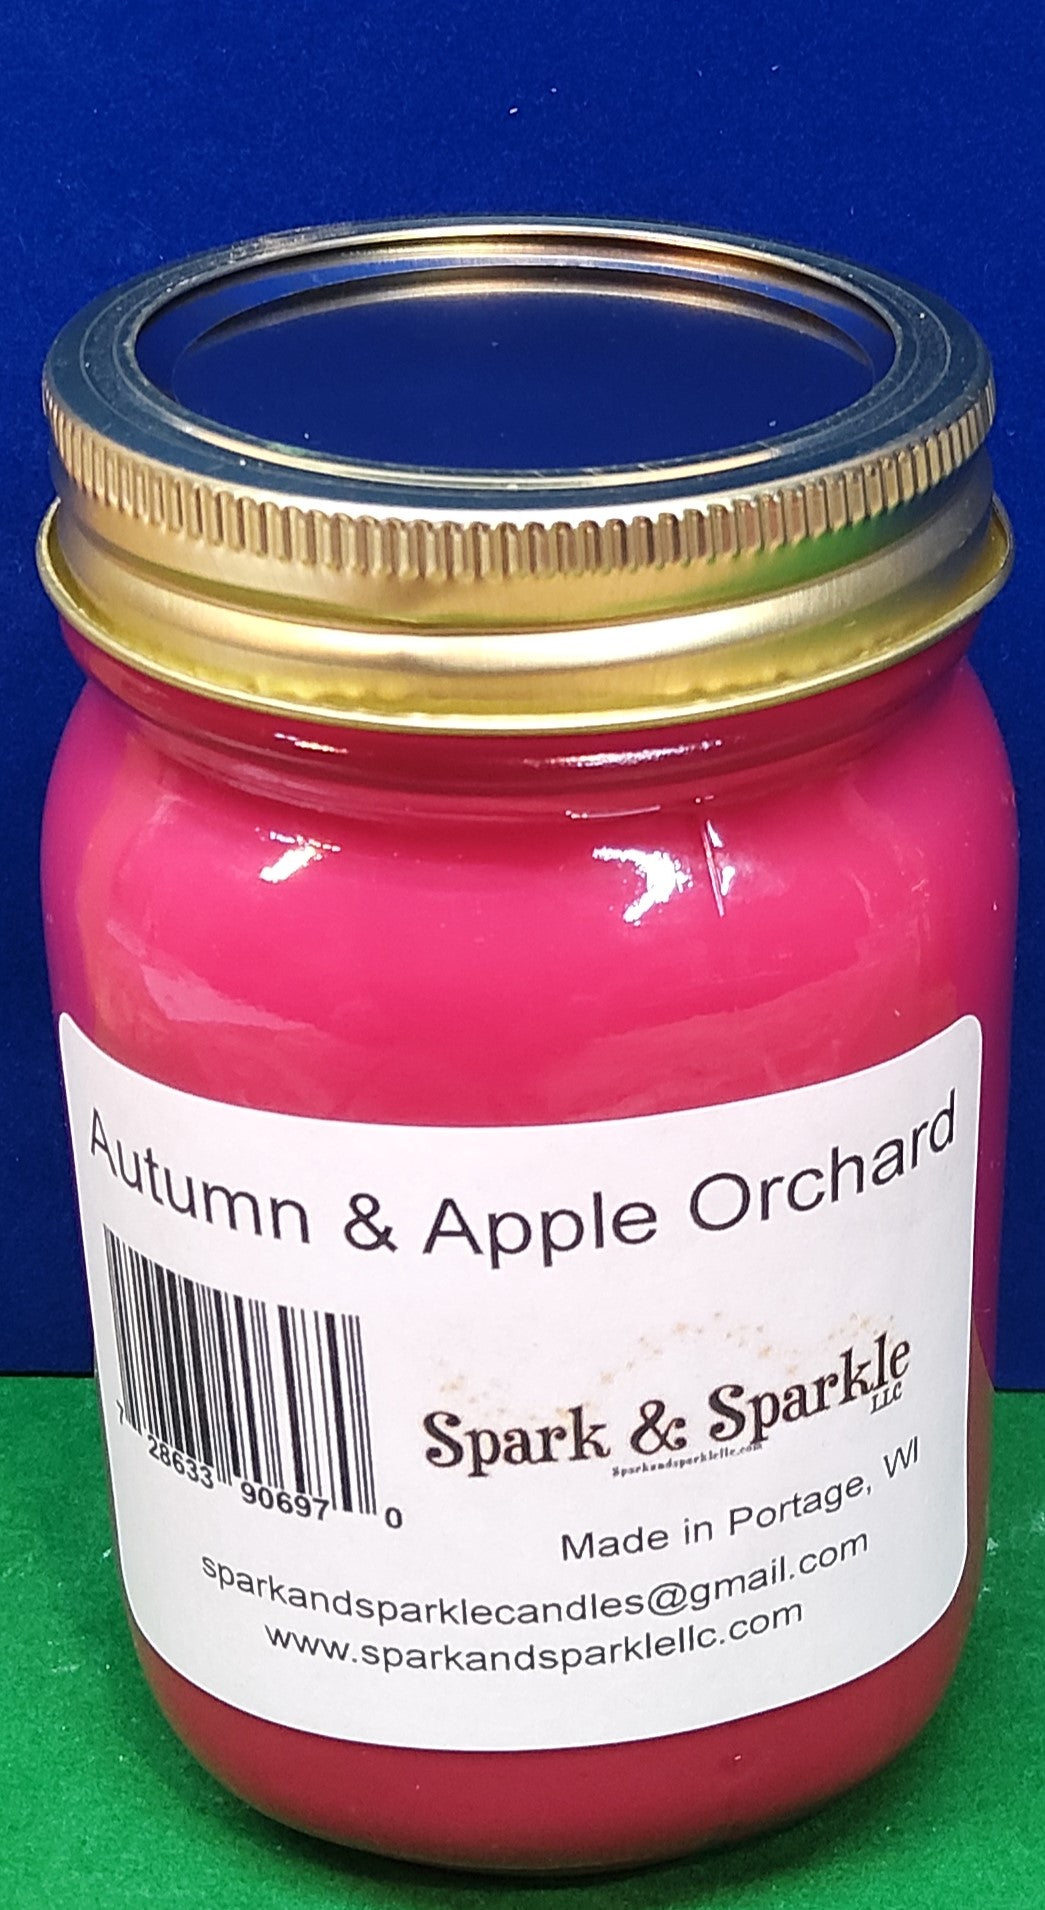 Autumn & Apple Orchard Soy Candles & Wax Melts